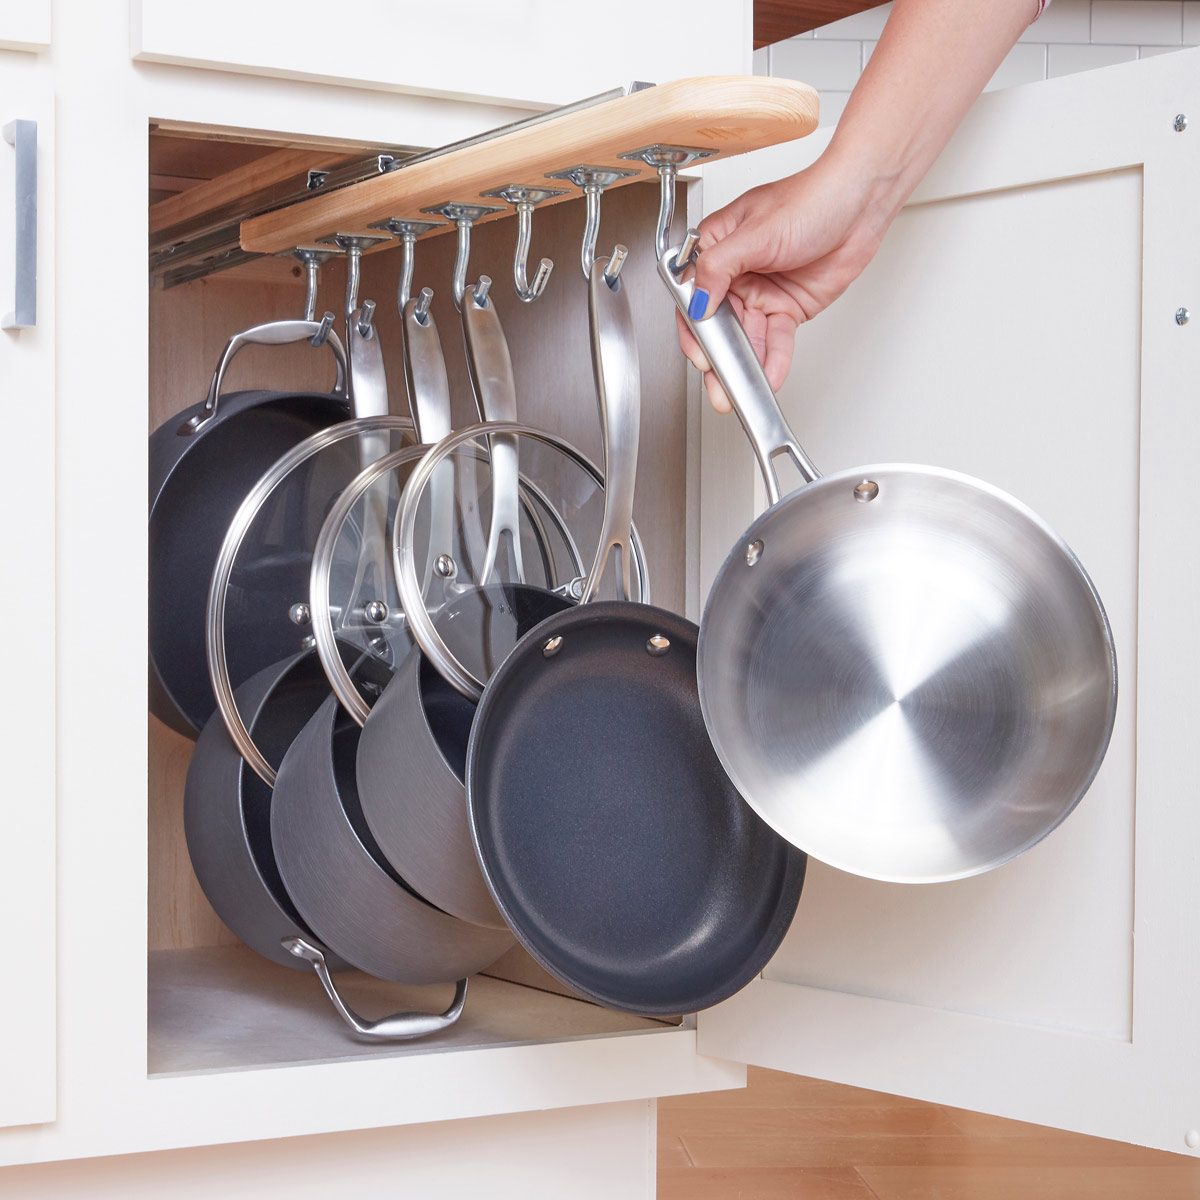 How to Make a Pot and Pan Pullout to Increase Kitchen Storage (DIY)